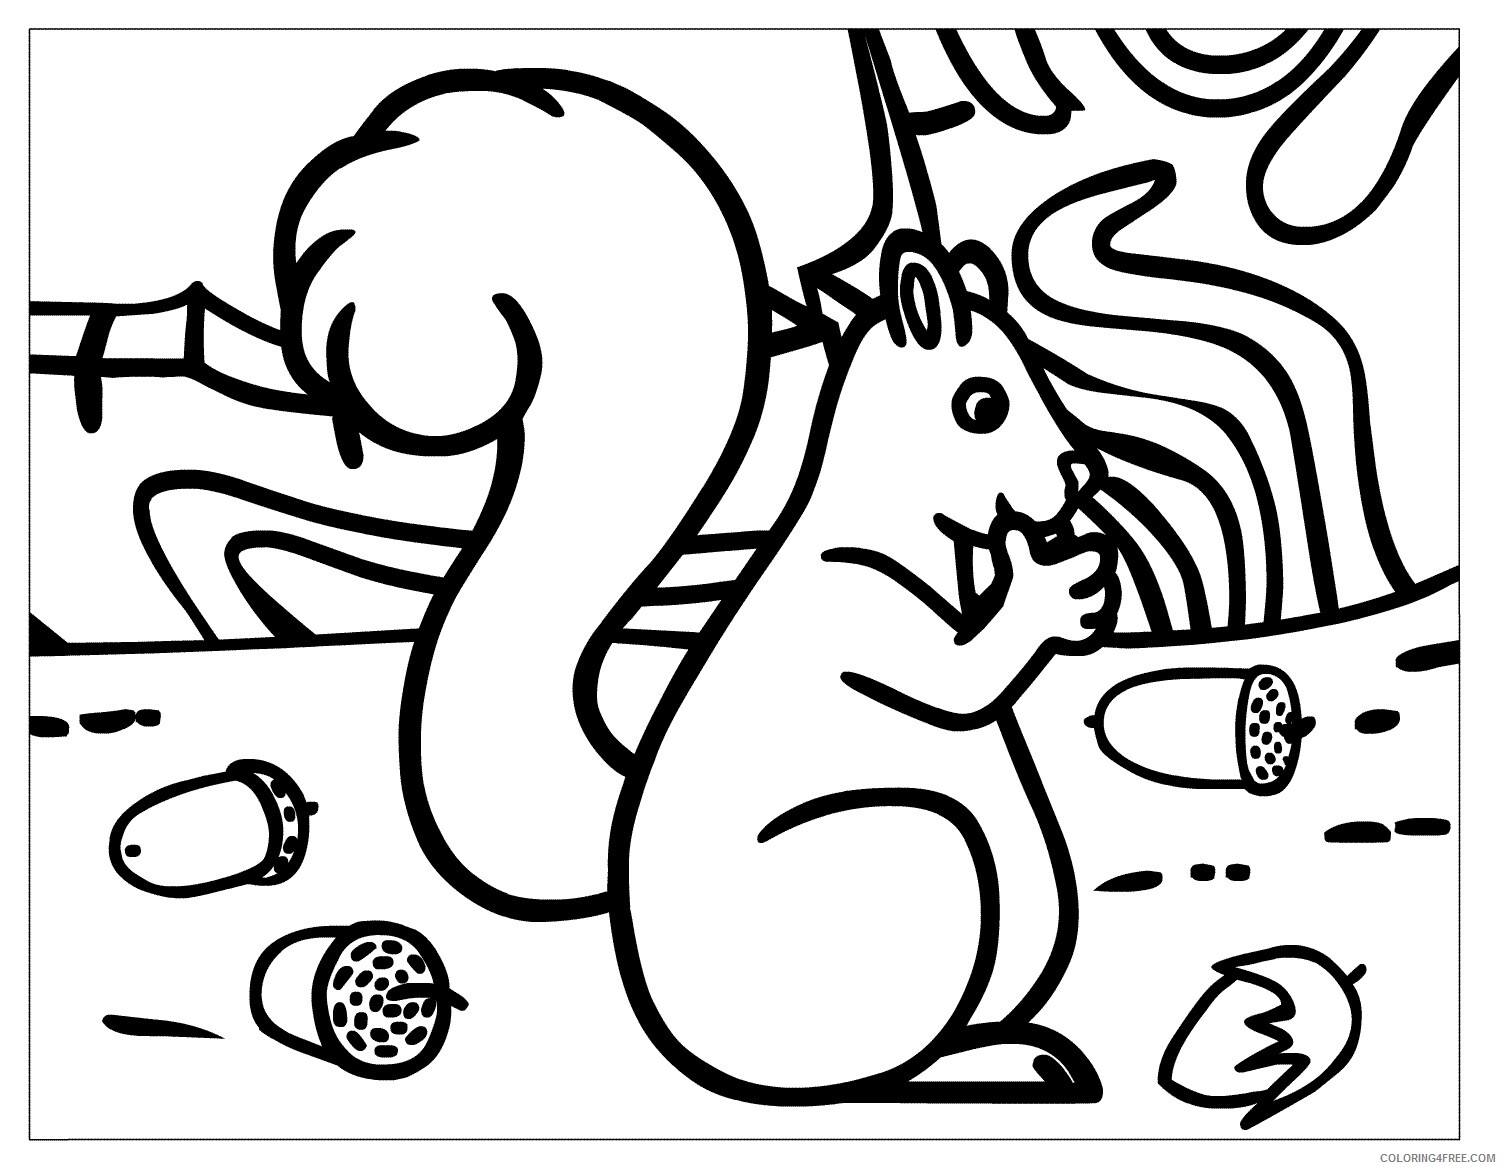 Acorns Coloring Pages Printable Sheets Acorns Page jpg 2021 a 1487 Coloring4free